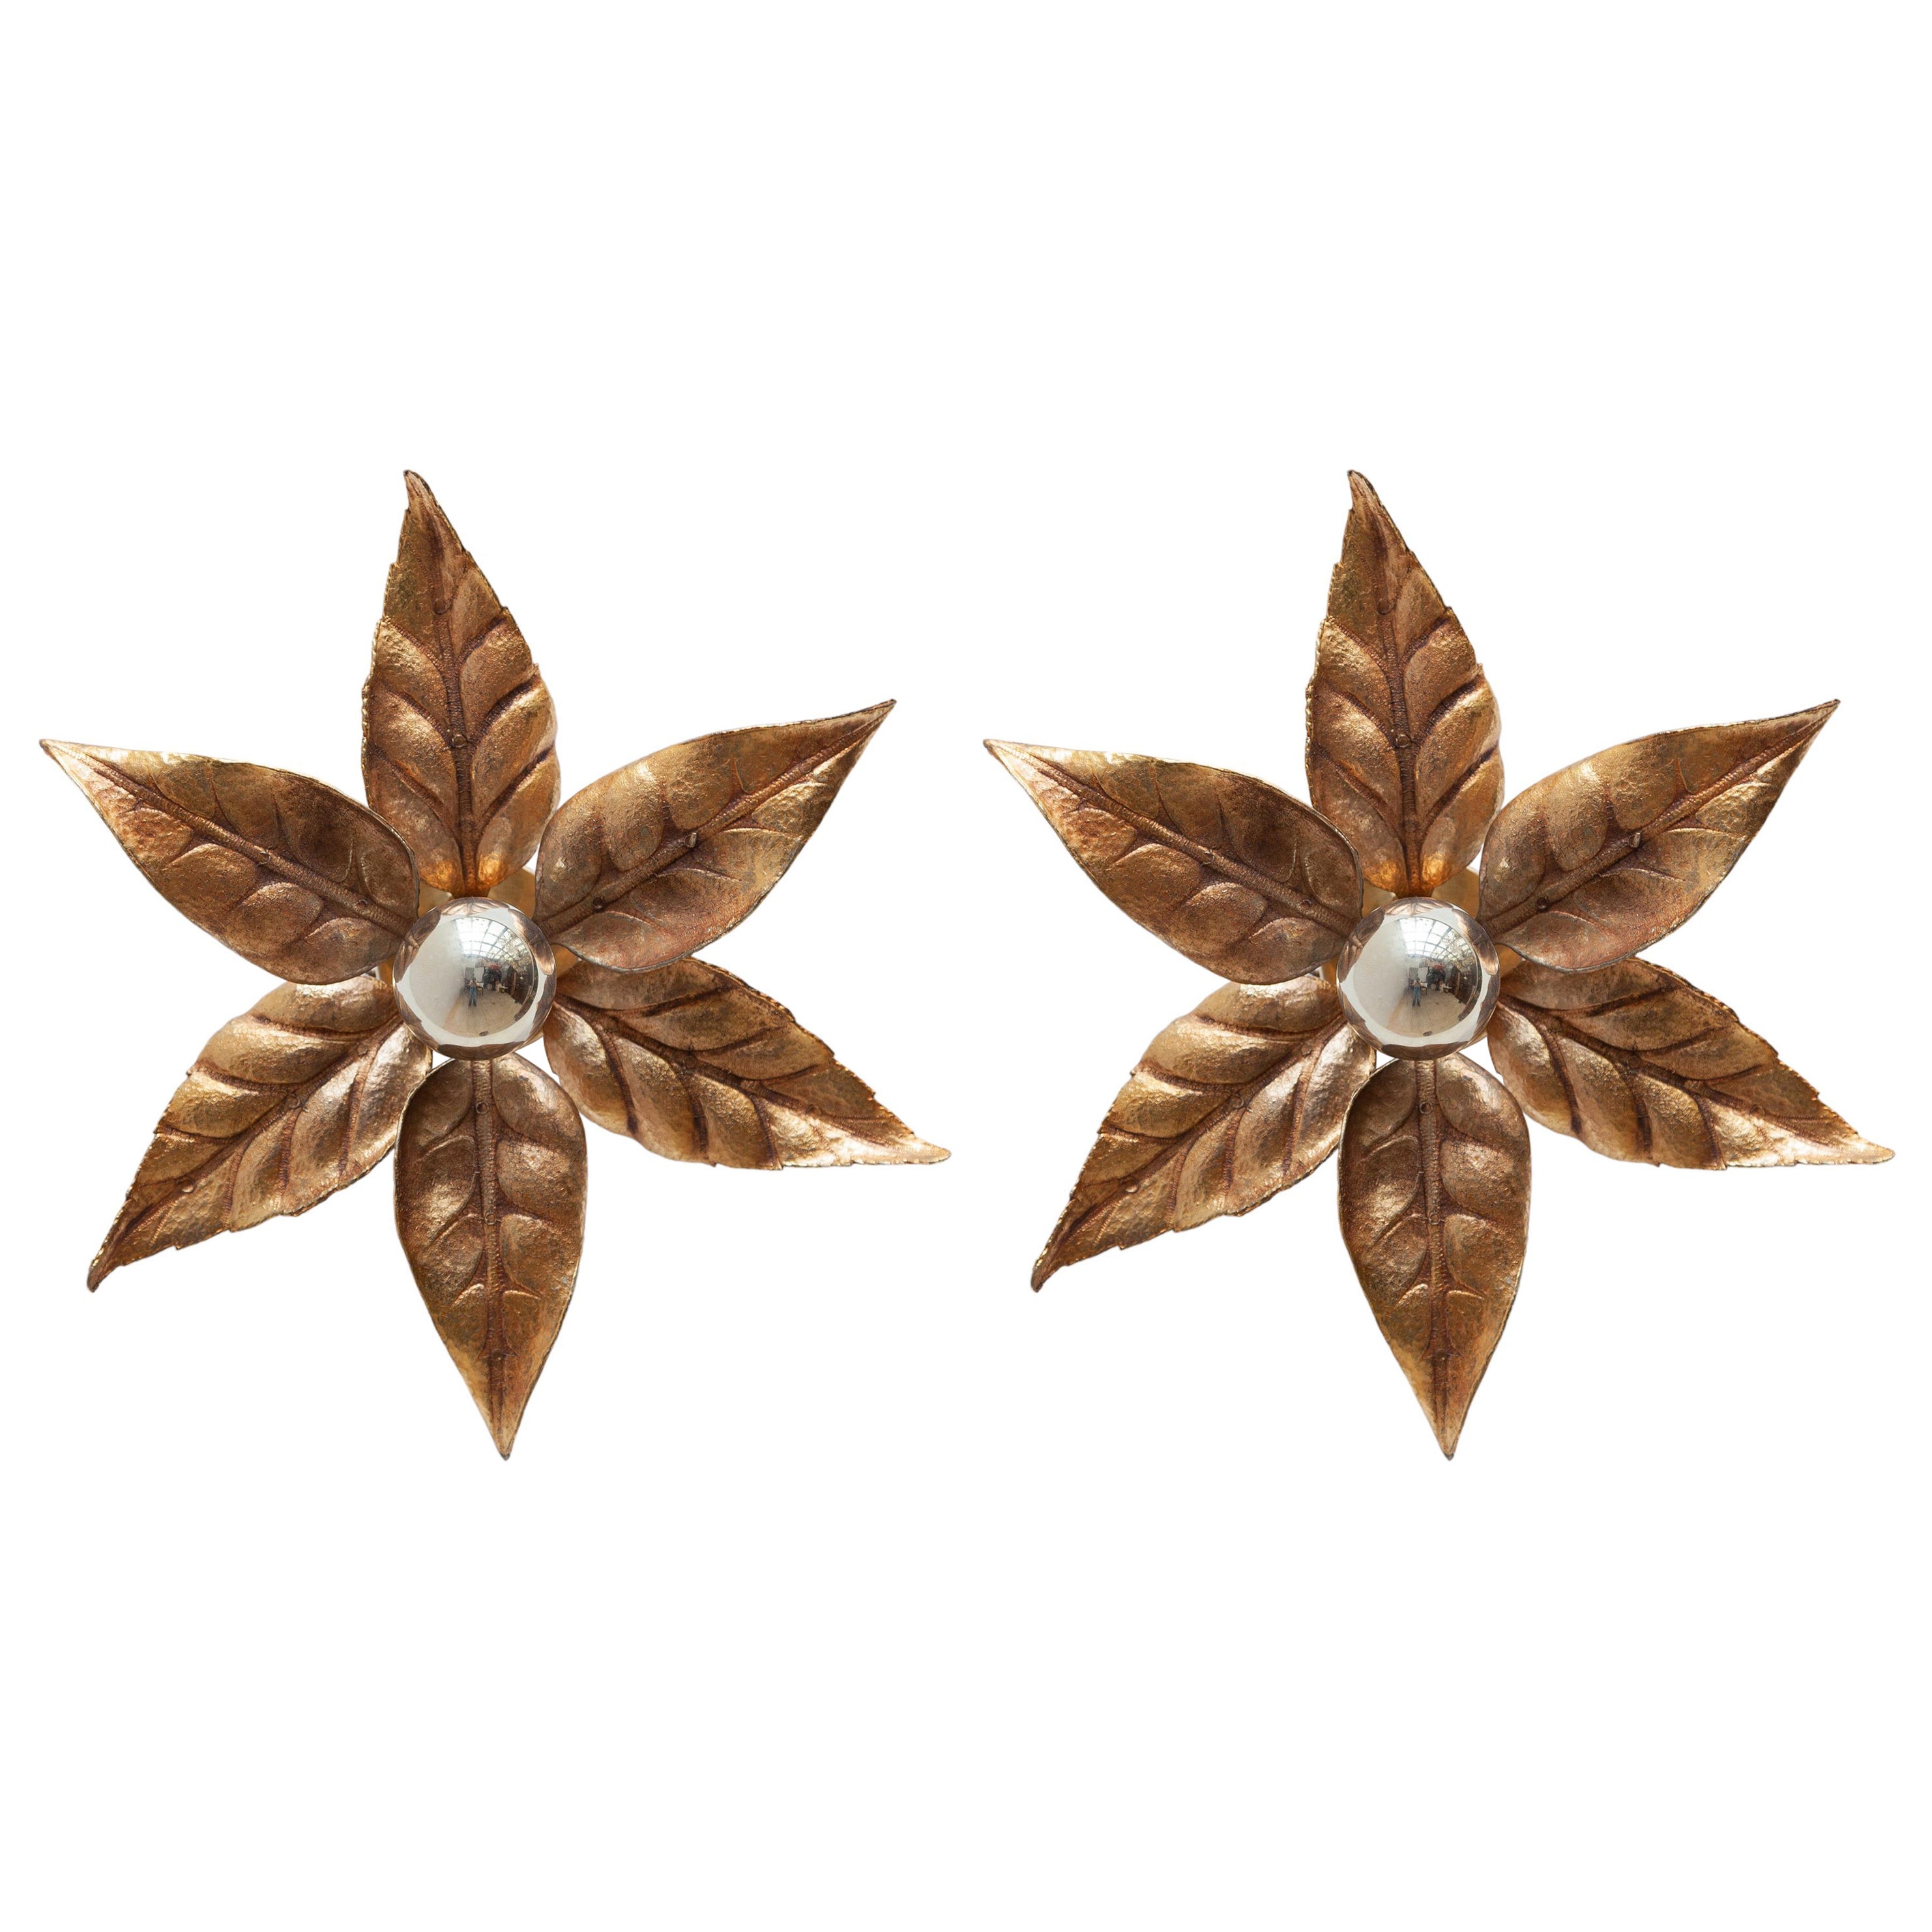 Willy Daro Set of Two Brass Flower Wall Lights, Belgium, 1970s for Massive